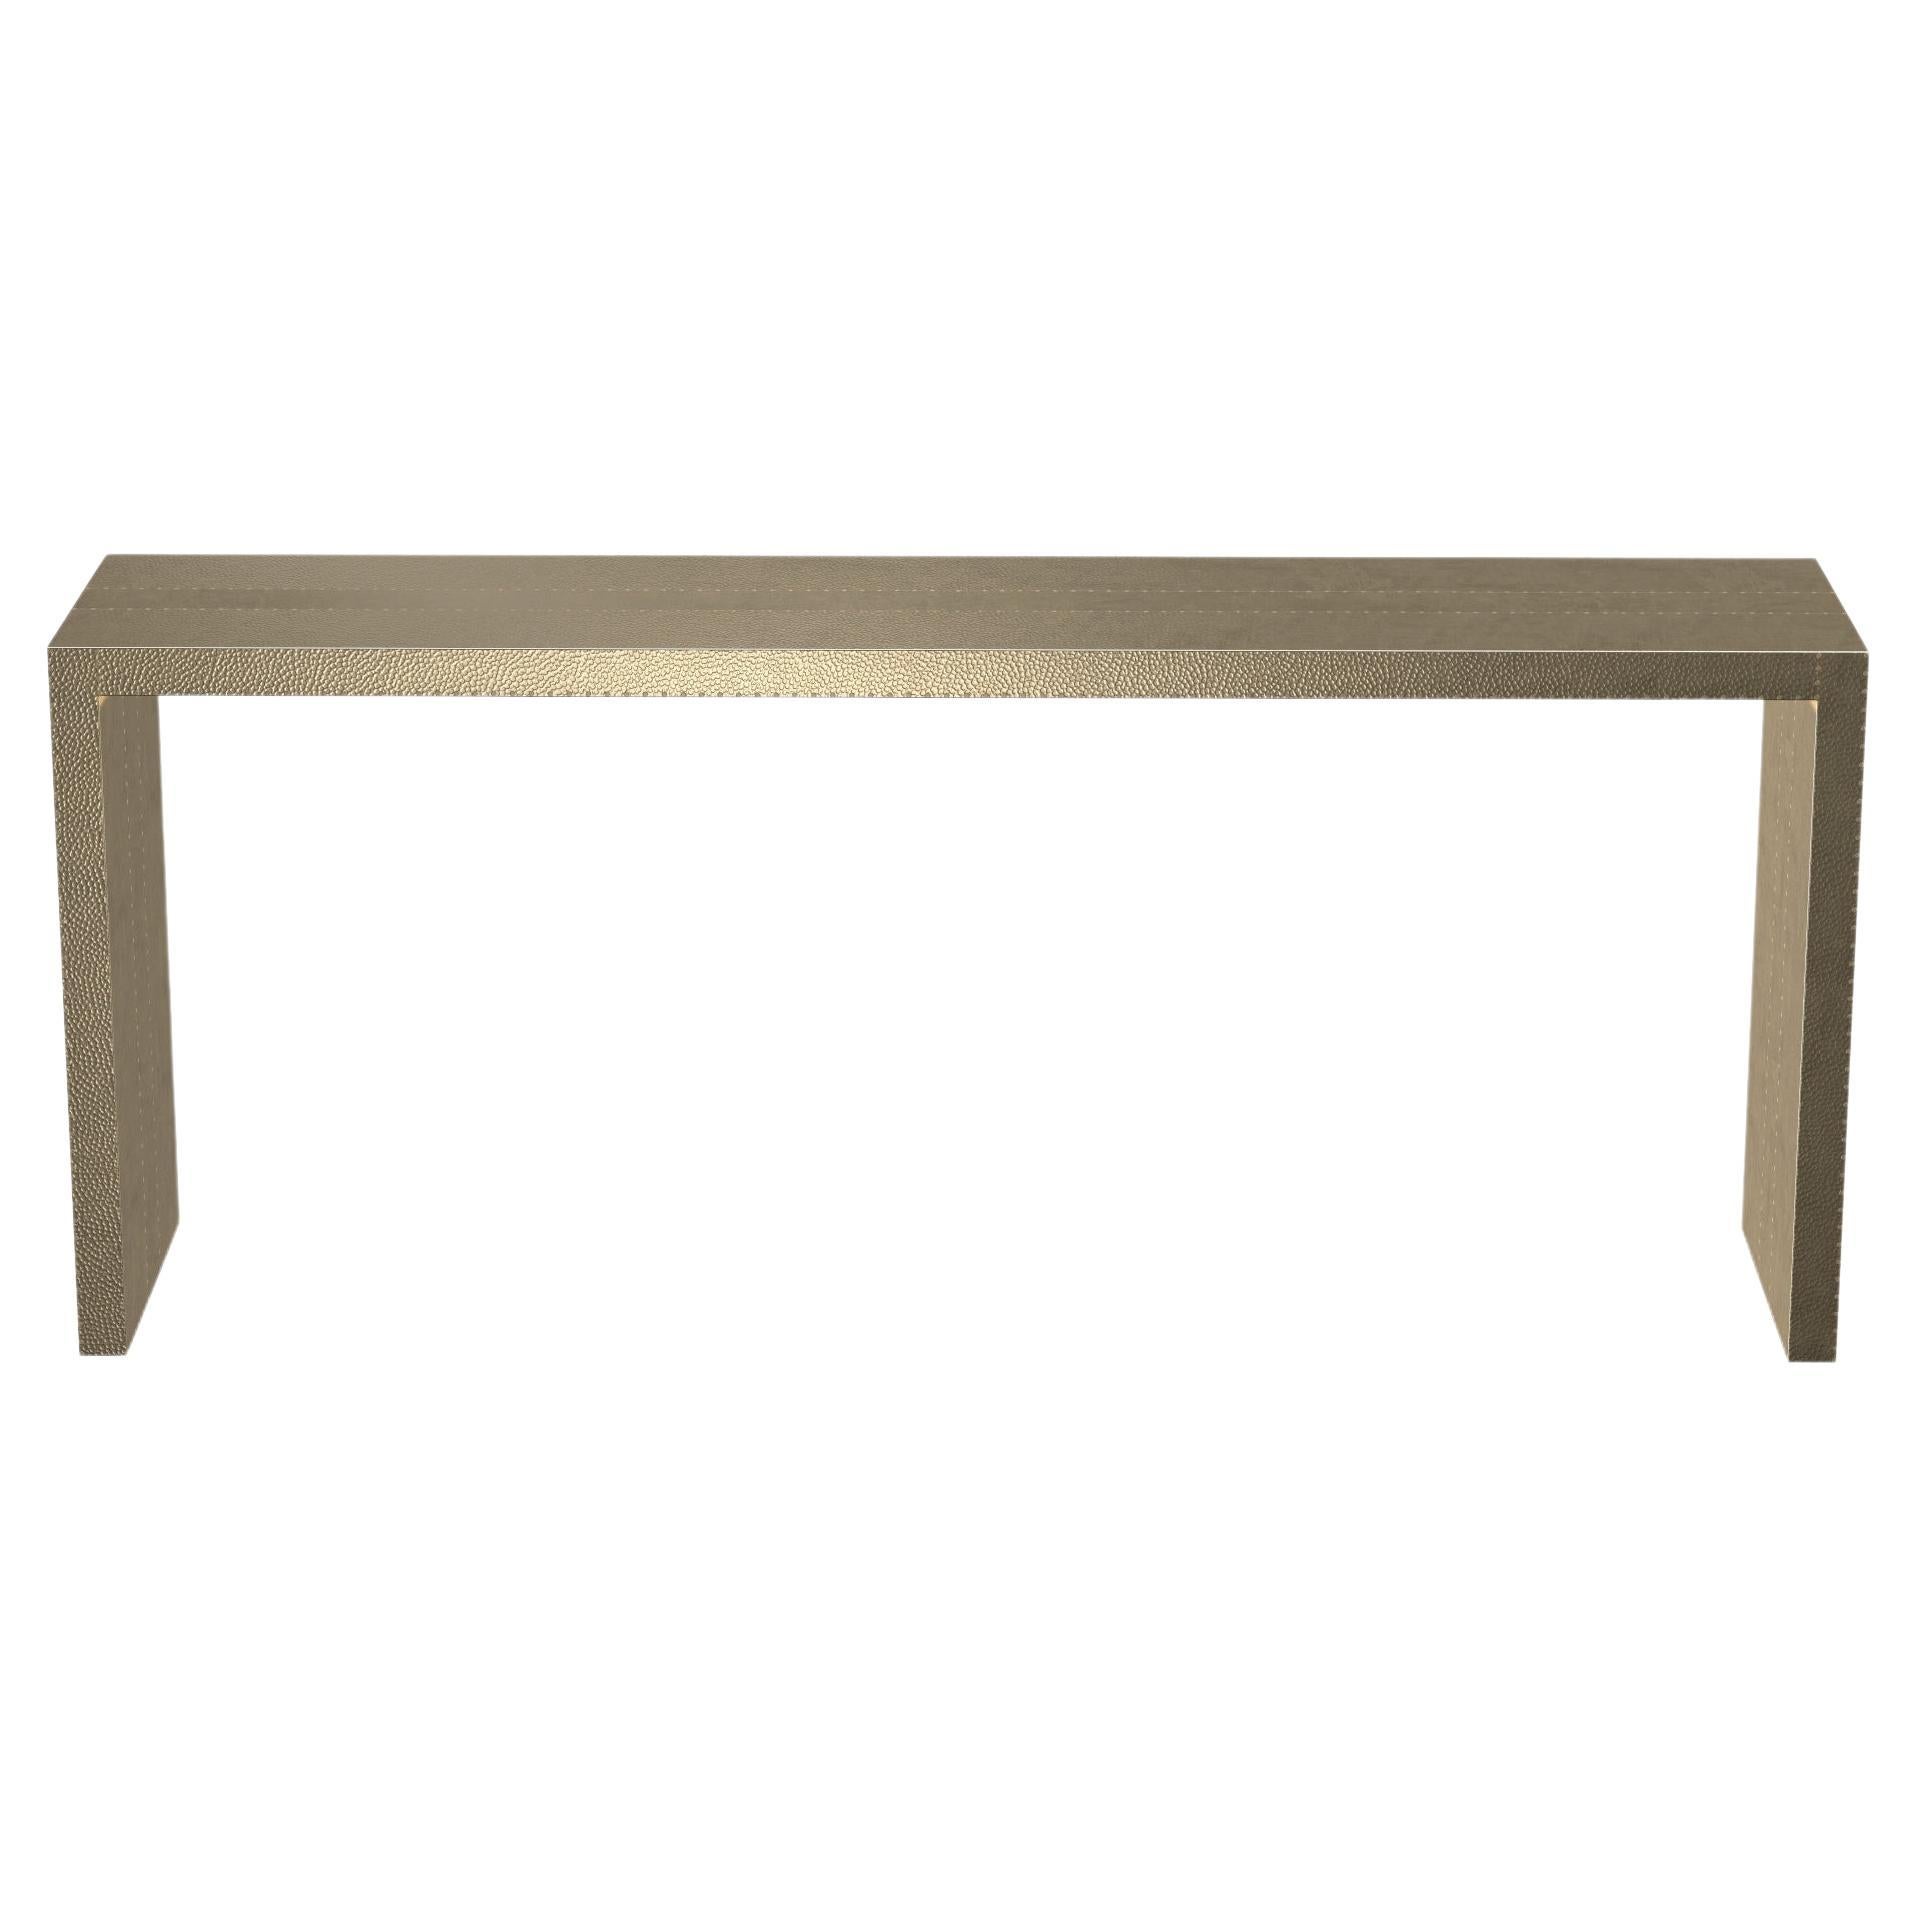 Art Deco Desks and Writing Console Tables Mid. Hammered in Brass by Alison Spear For Sale